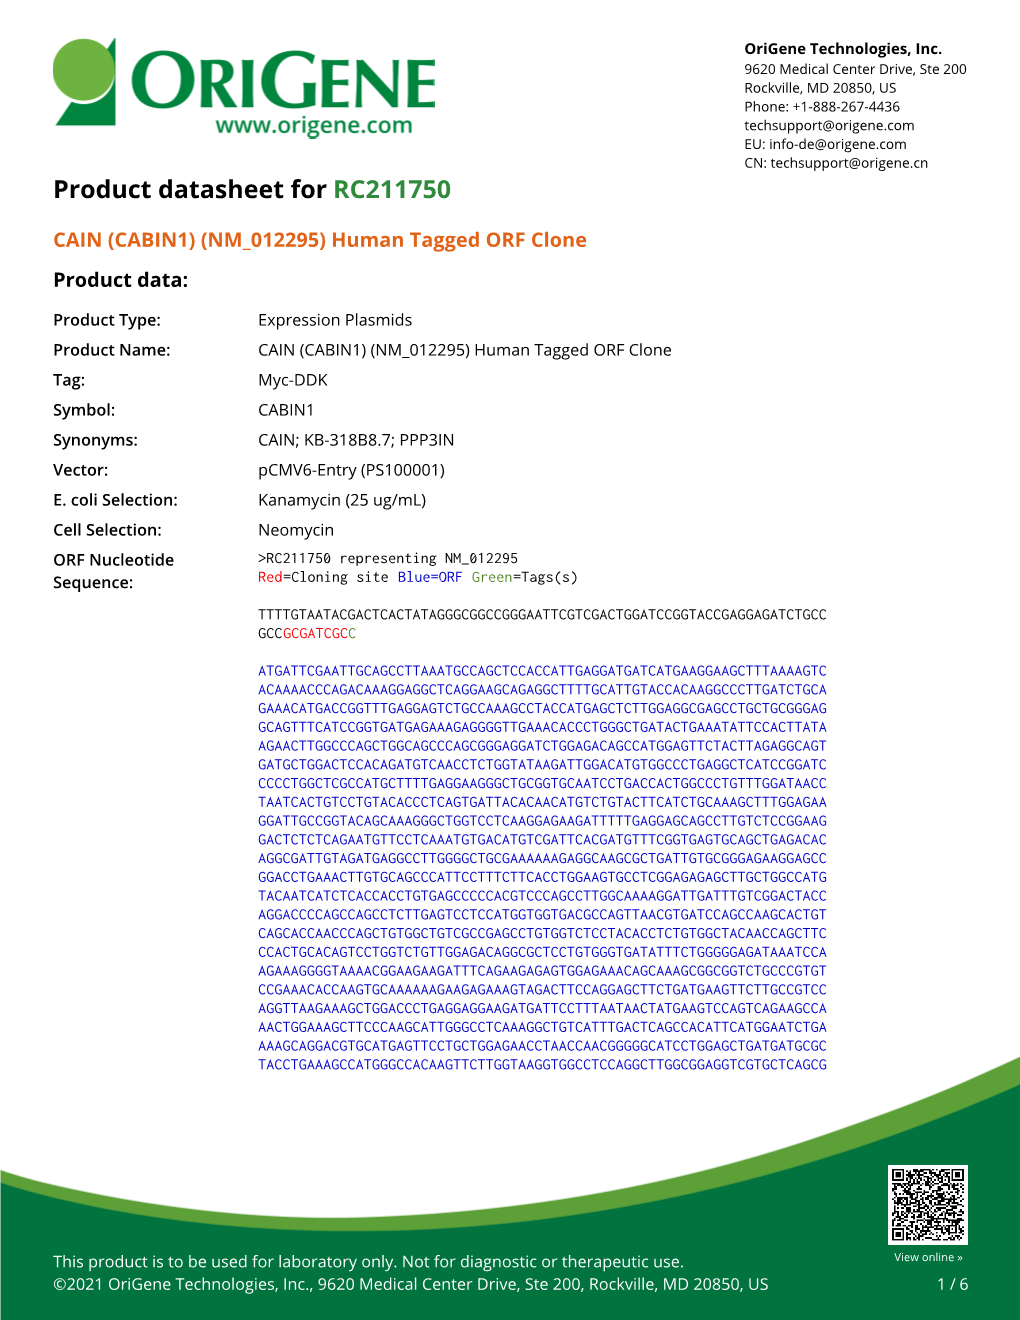 (CABIN1) (NM 012295) Human Tagged ORF Clone Product Data